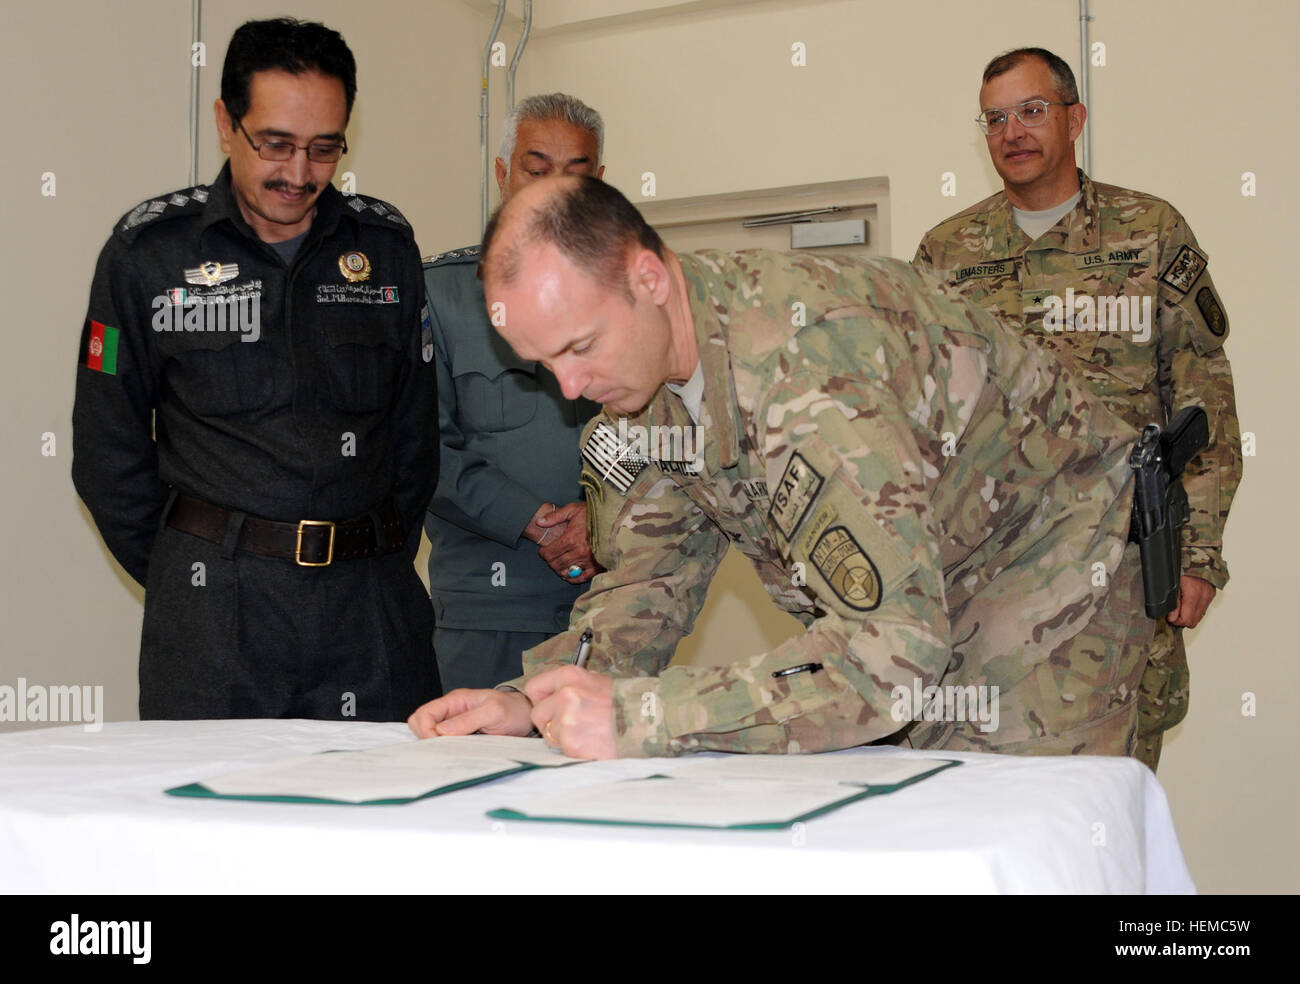 US Army Col. Andy Backus, the NATO Training Mission-Afghanistan engineer director, signs documents transitioning the Wardak National Logistics Center to the Afghan National Police Nov. 18, 2012, during a ribbon-cutting ceremony. Backus was actively involved in overseeing the construction project. The new facility allows several ANA logistics entities to work out of the same location instead of various locations scattered through the capital, Kabul. (Photo by U.S. Army Capt. Monika Comeaux, NTM-A/DCOM-SPO PAO) National Logistics Center-Wardak transitions to Afghan National Police control 121118 Stock Photo